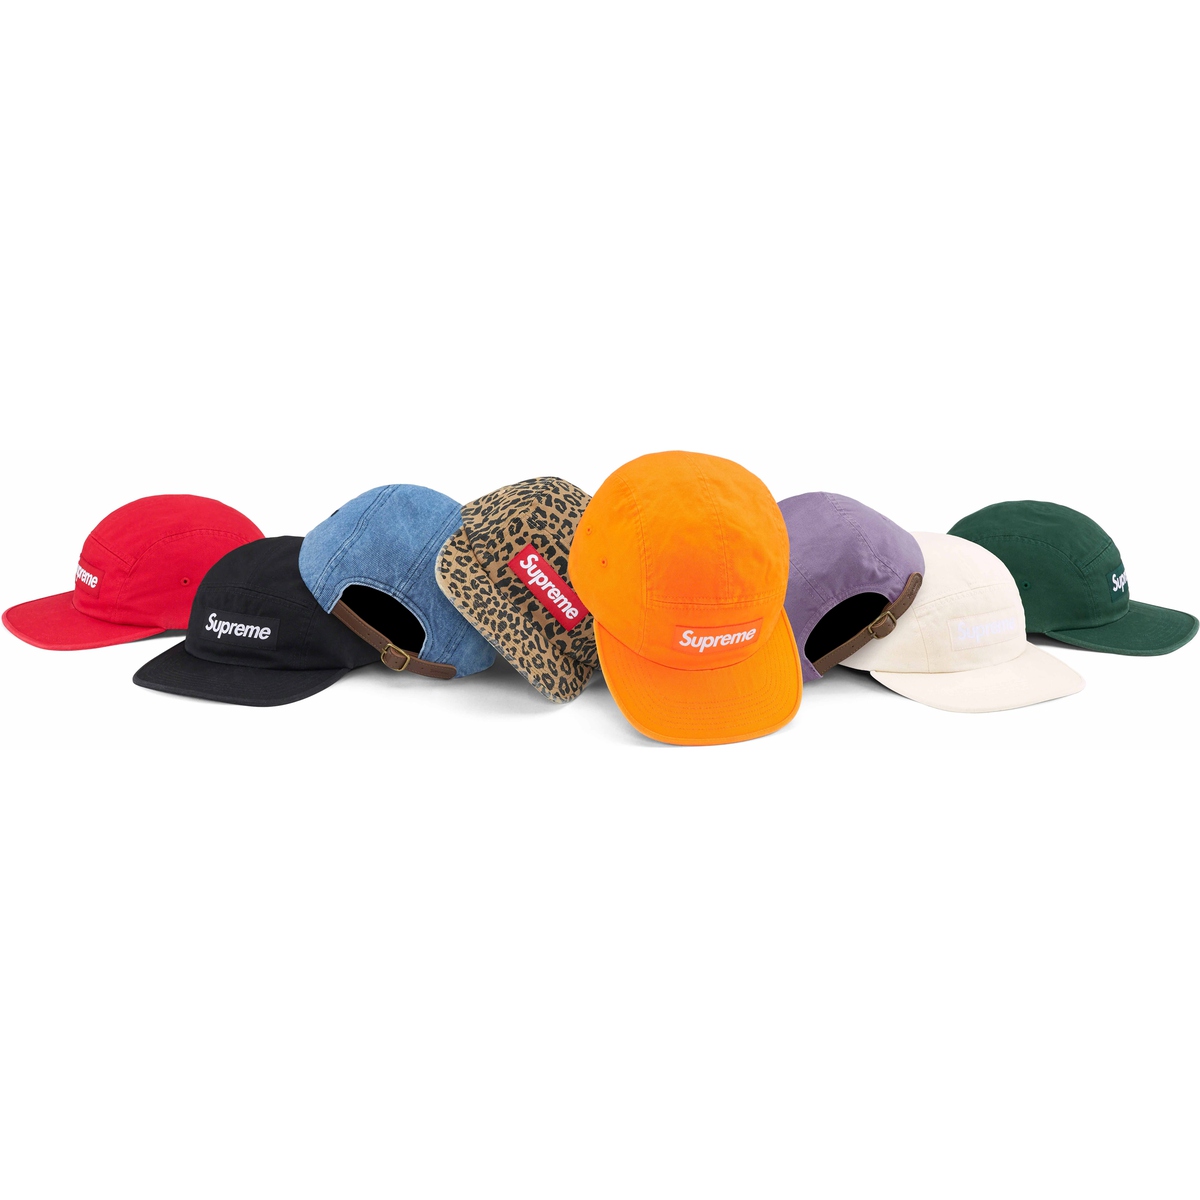 Supreme Washed Chino Twill Camp Cap for fall winter 23 season